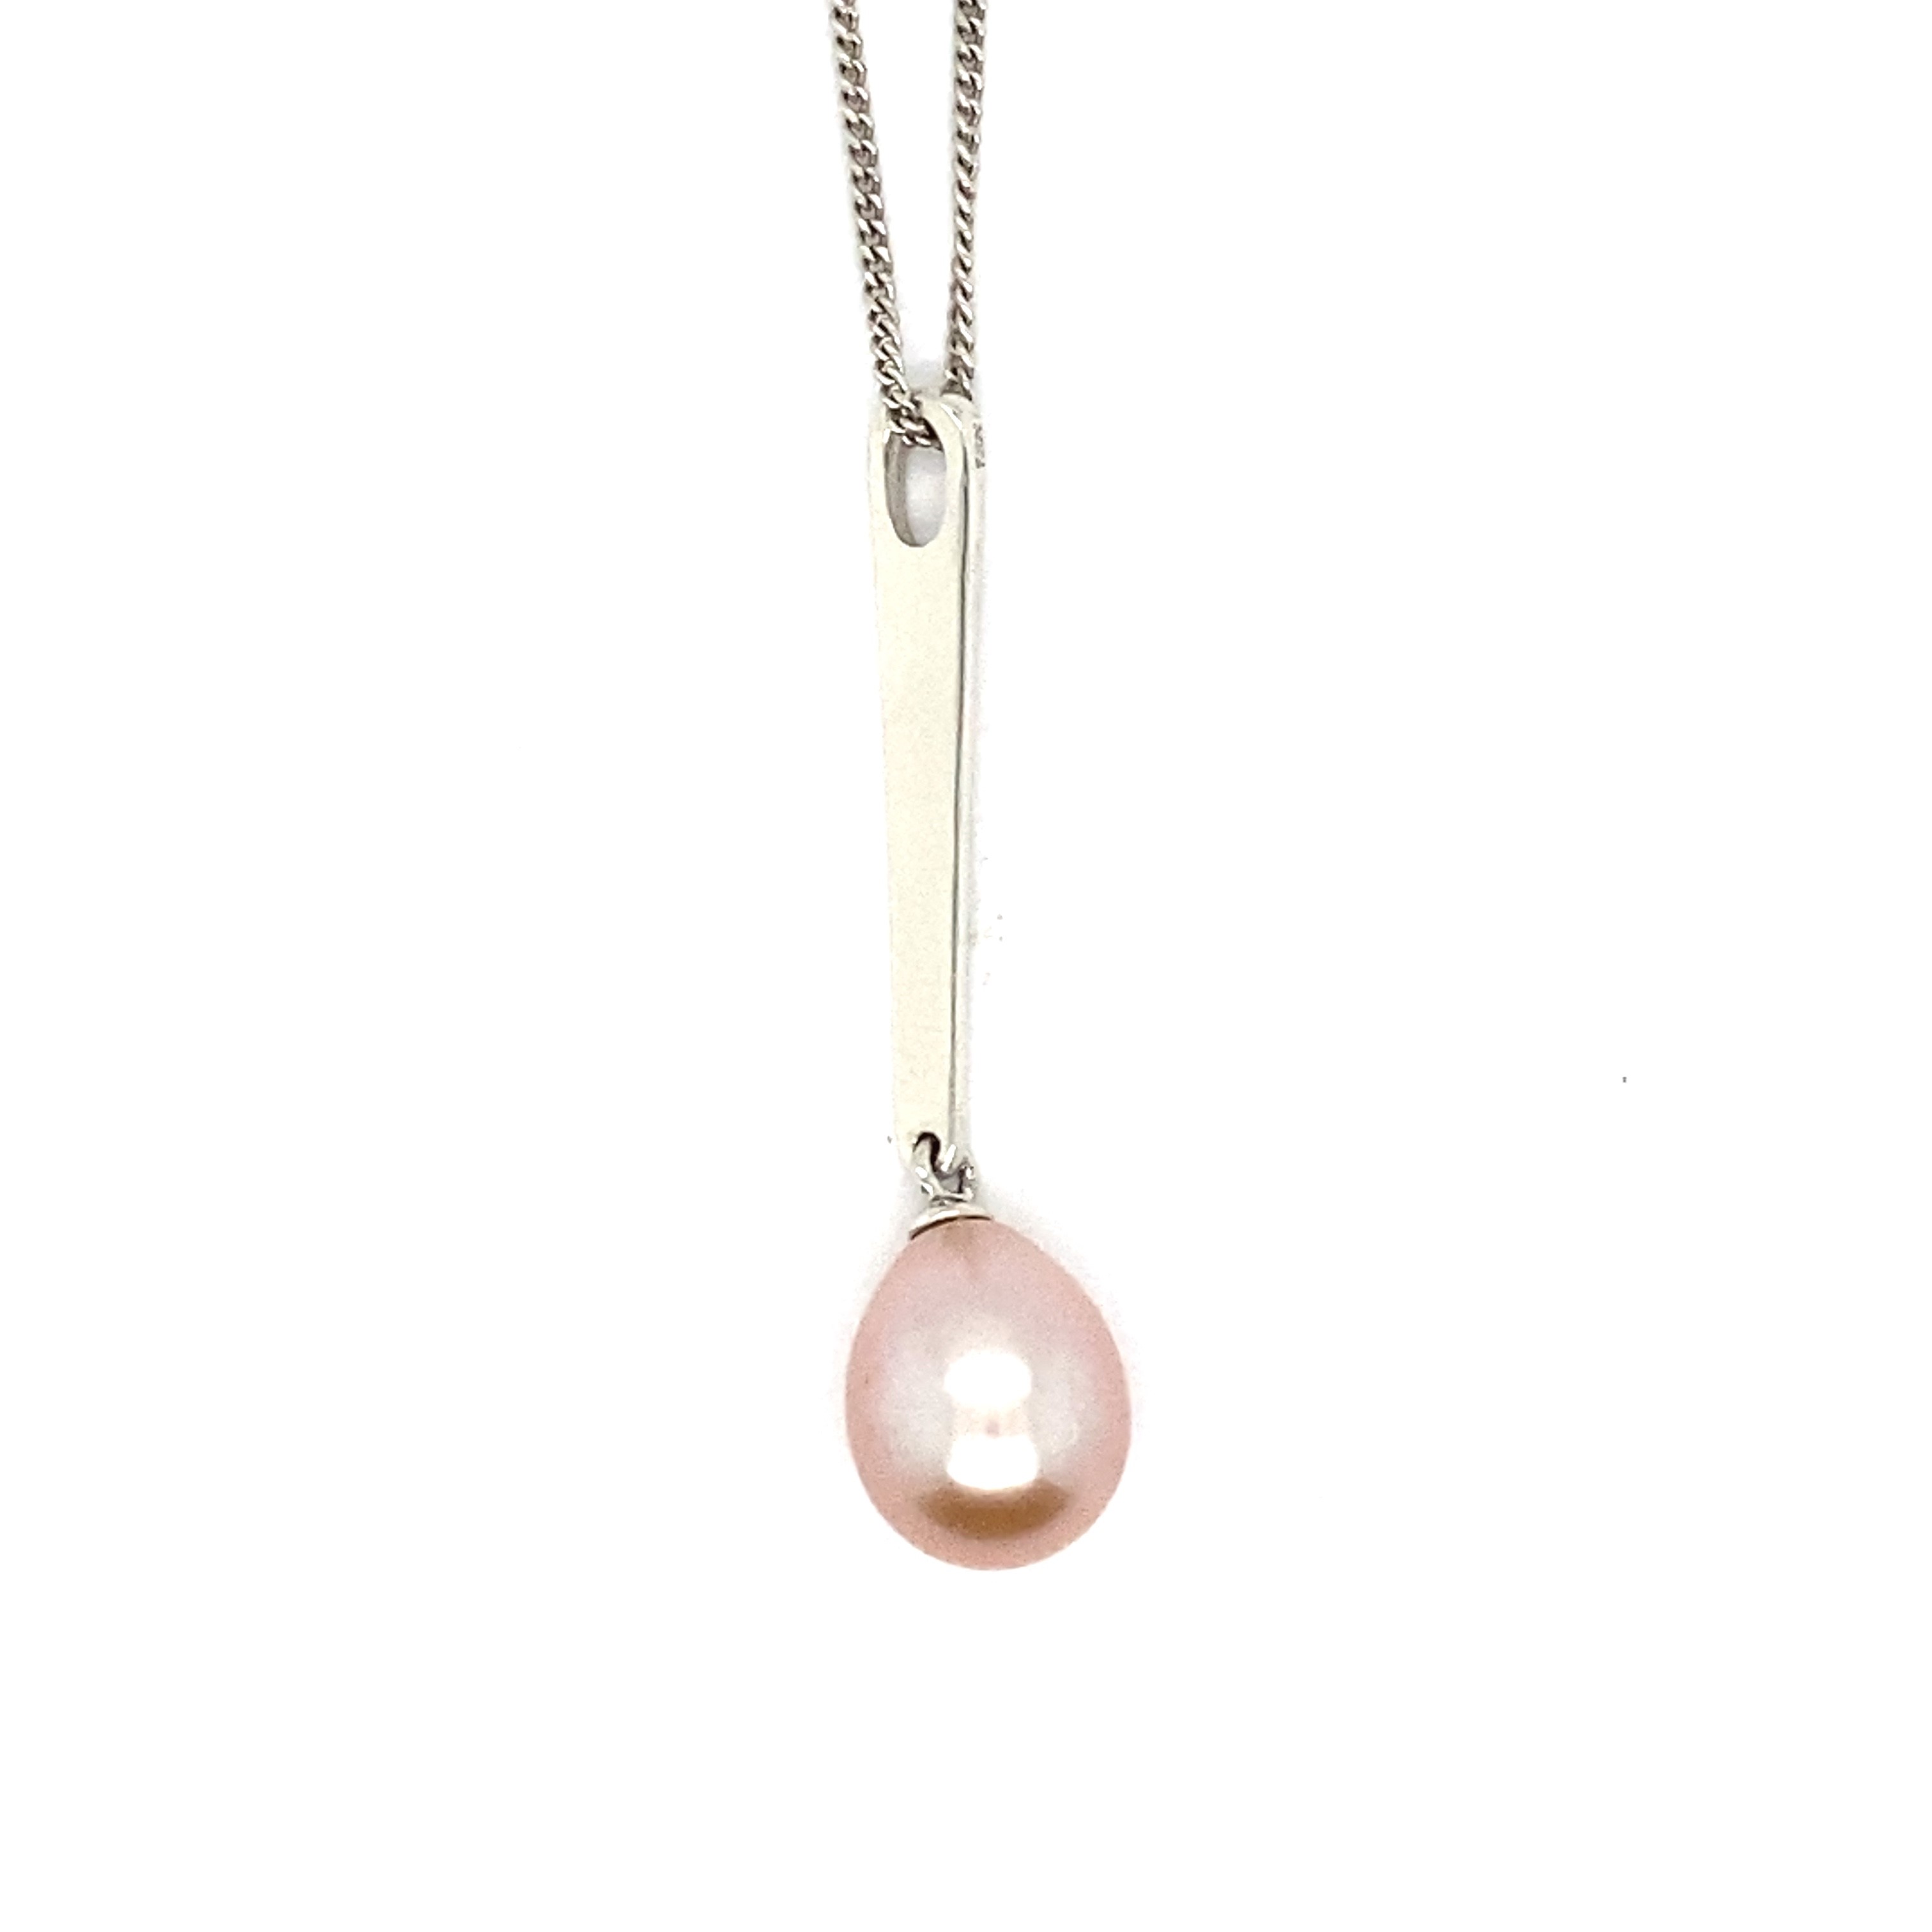 18ct white gold pendant featuring a pink pearl